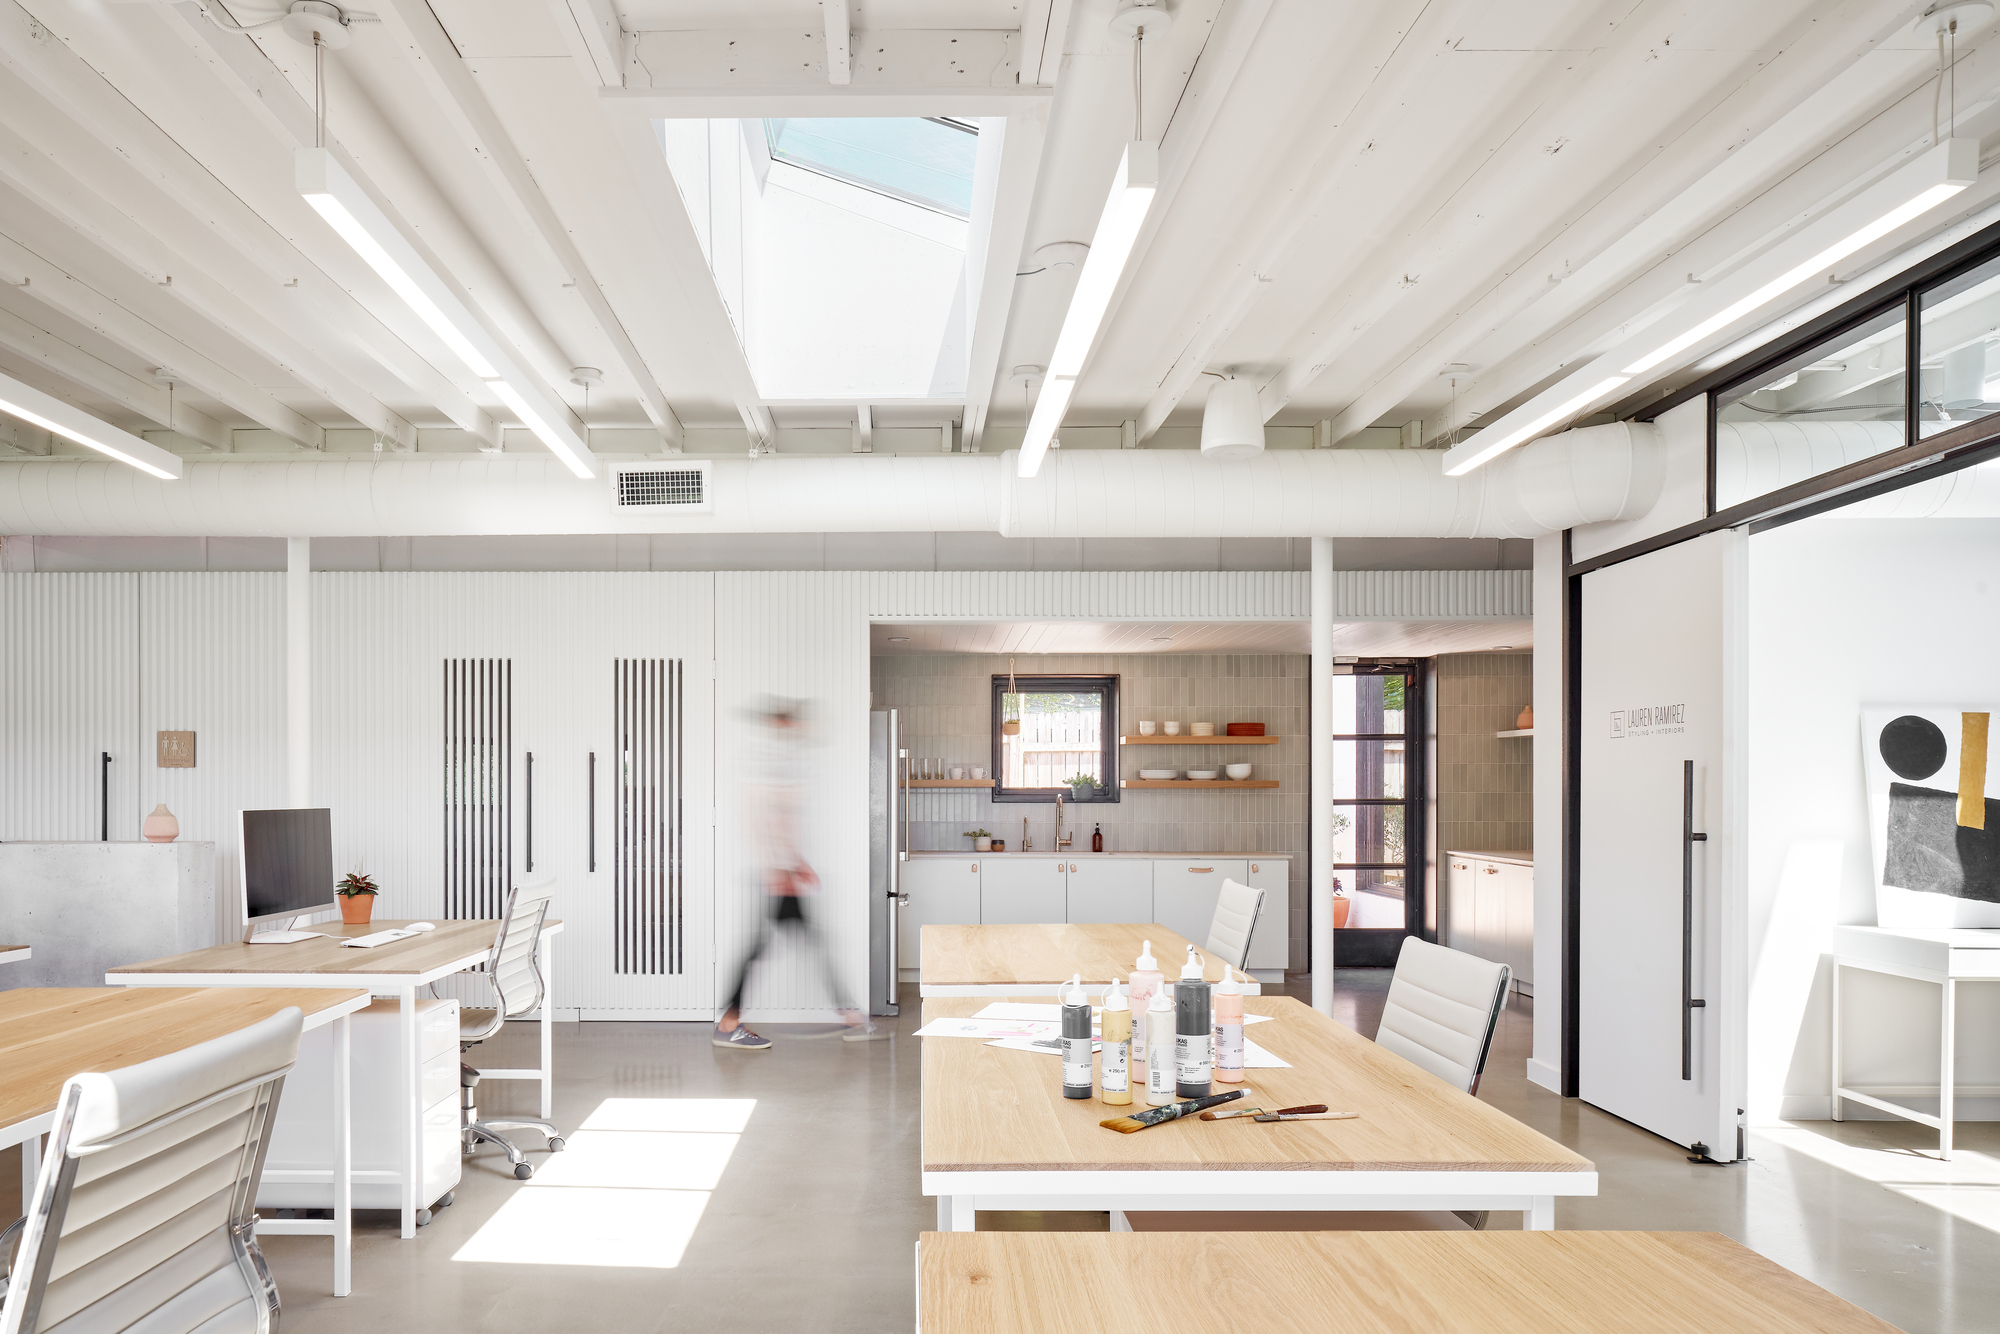 What will future workspaces look like?